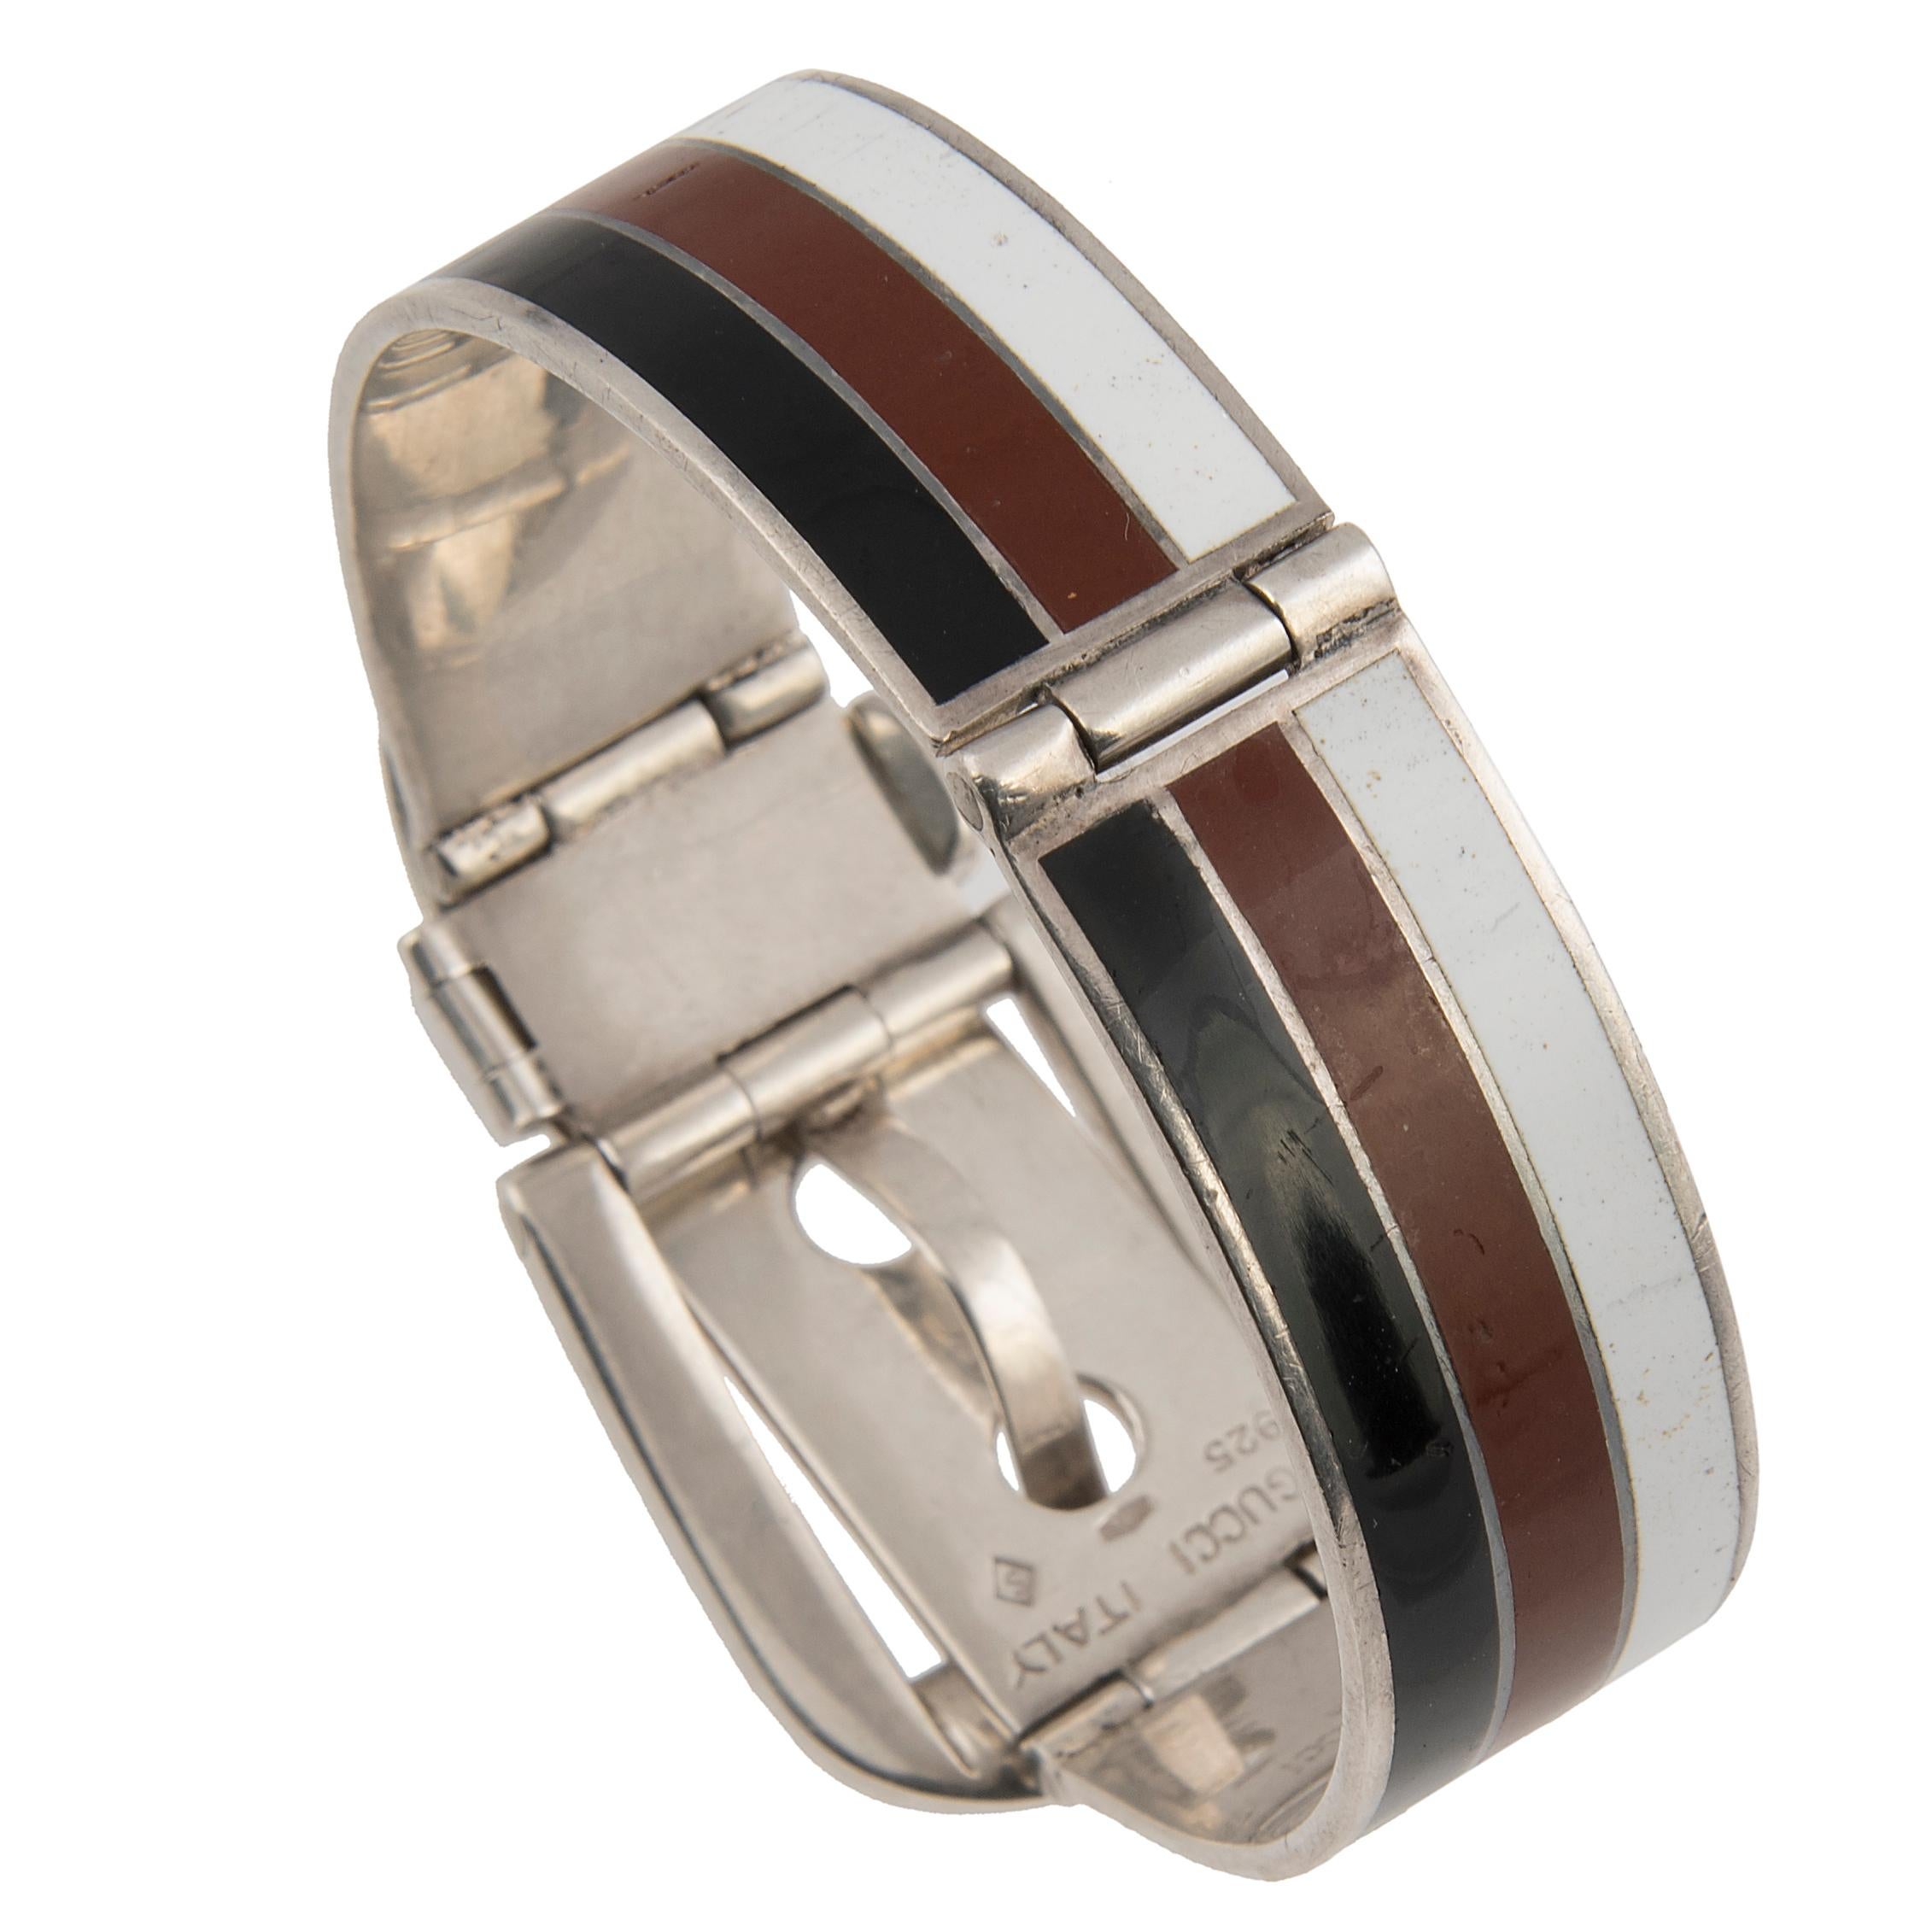 The timeless Garden Cuff Bracelet was first developed by Gucci in the 1950s. Designed as a sterling silver cuff bracelet with buckle closure, featuring white, brown and black enamel stripes.
Signed Gucci Italy and with Italian hallmarks
Size: 16.5 -